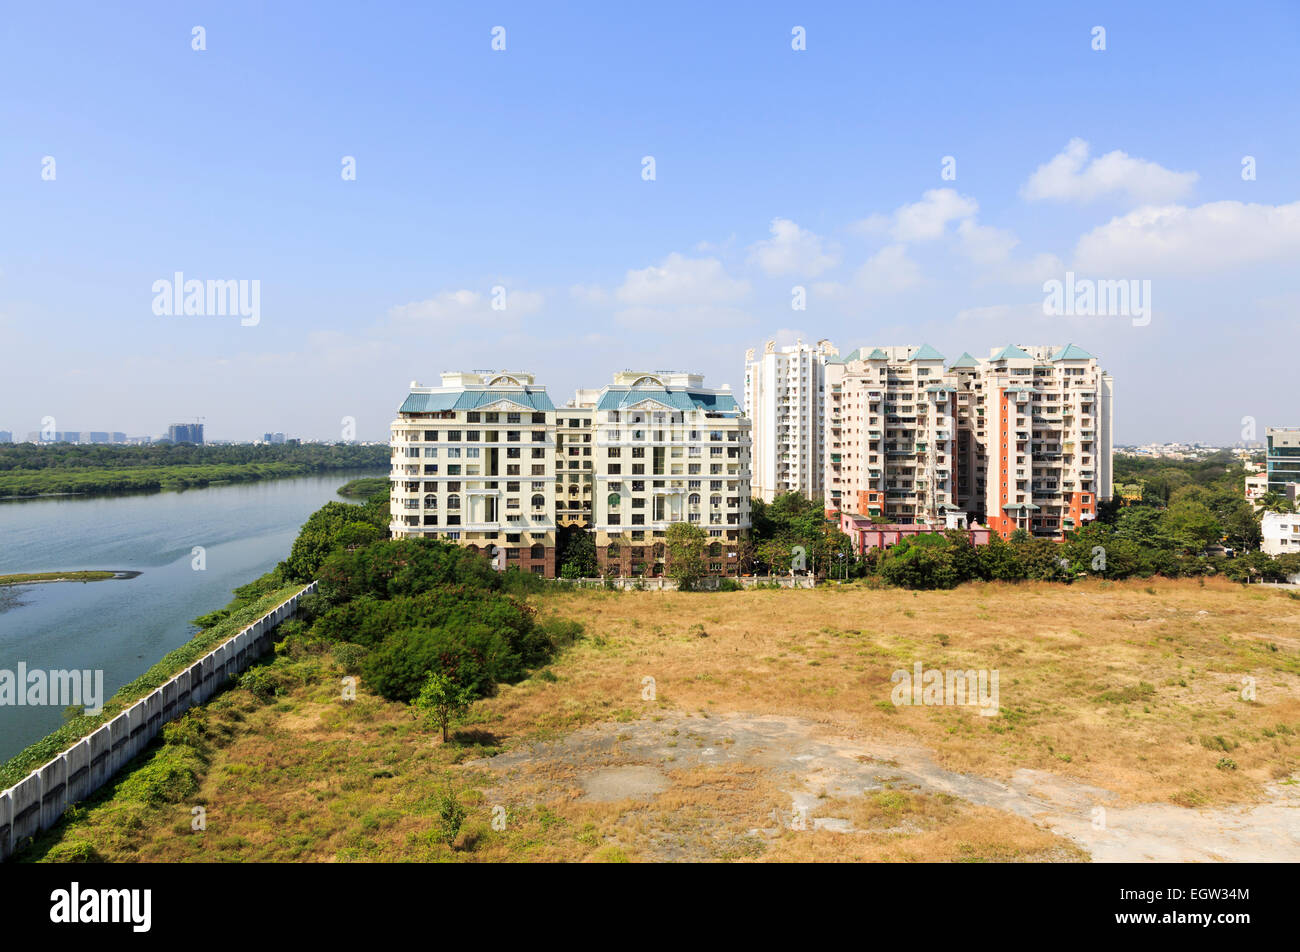 View of typical local apartment blocks on the seashore by the Adyar River estuary, Chennai, Tamil Nadu, southern India Stock Photo